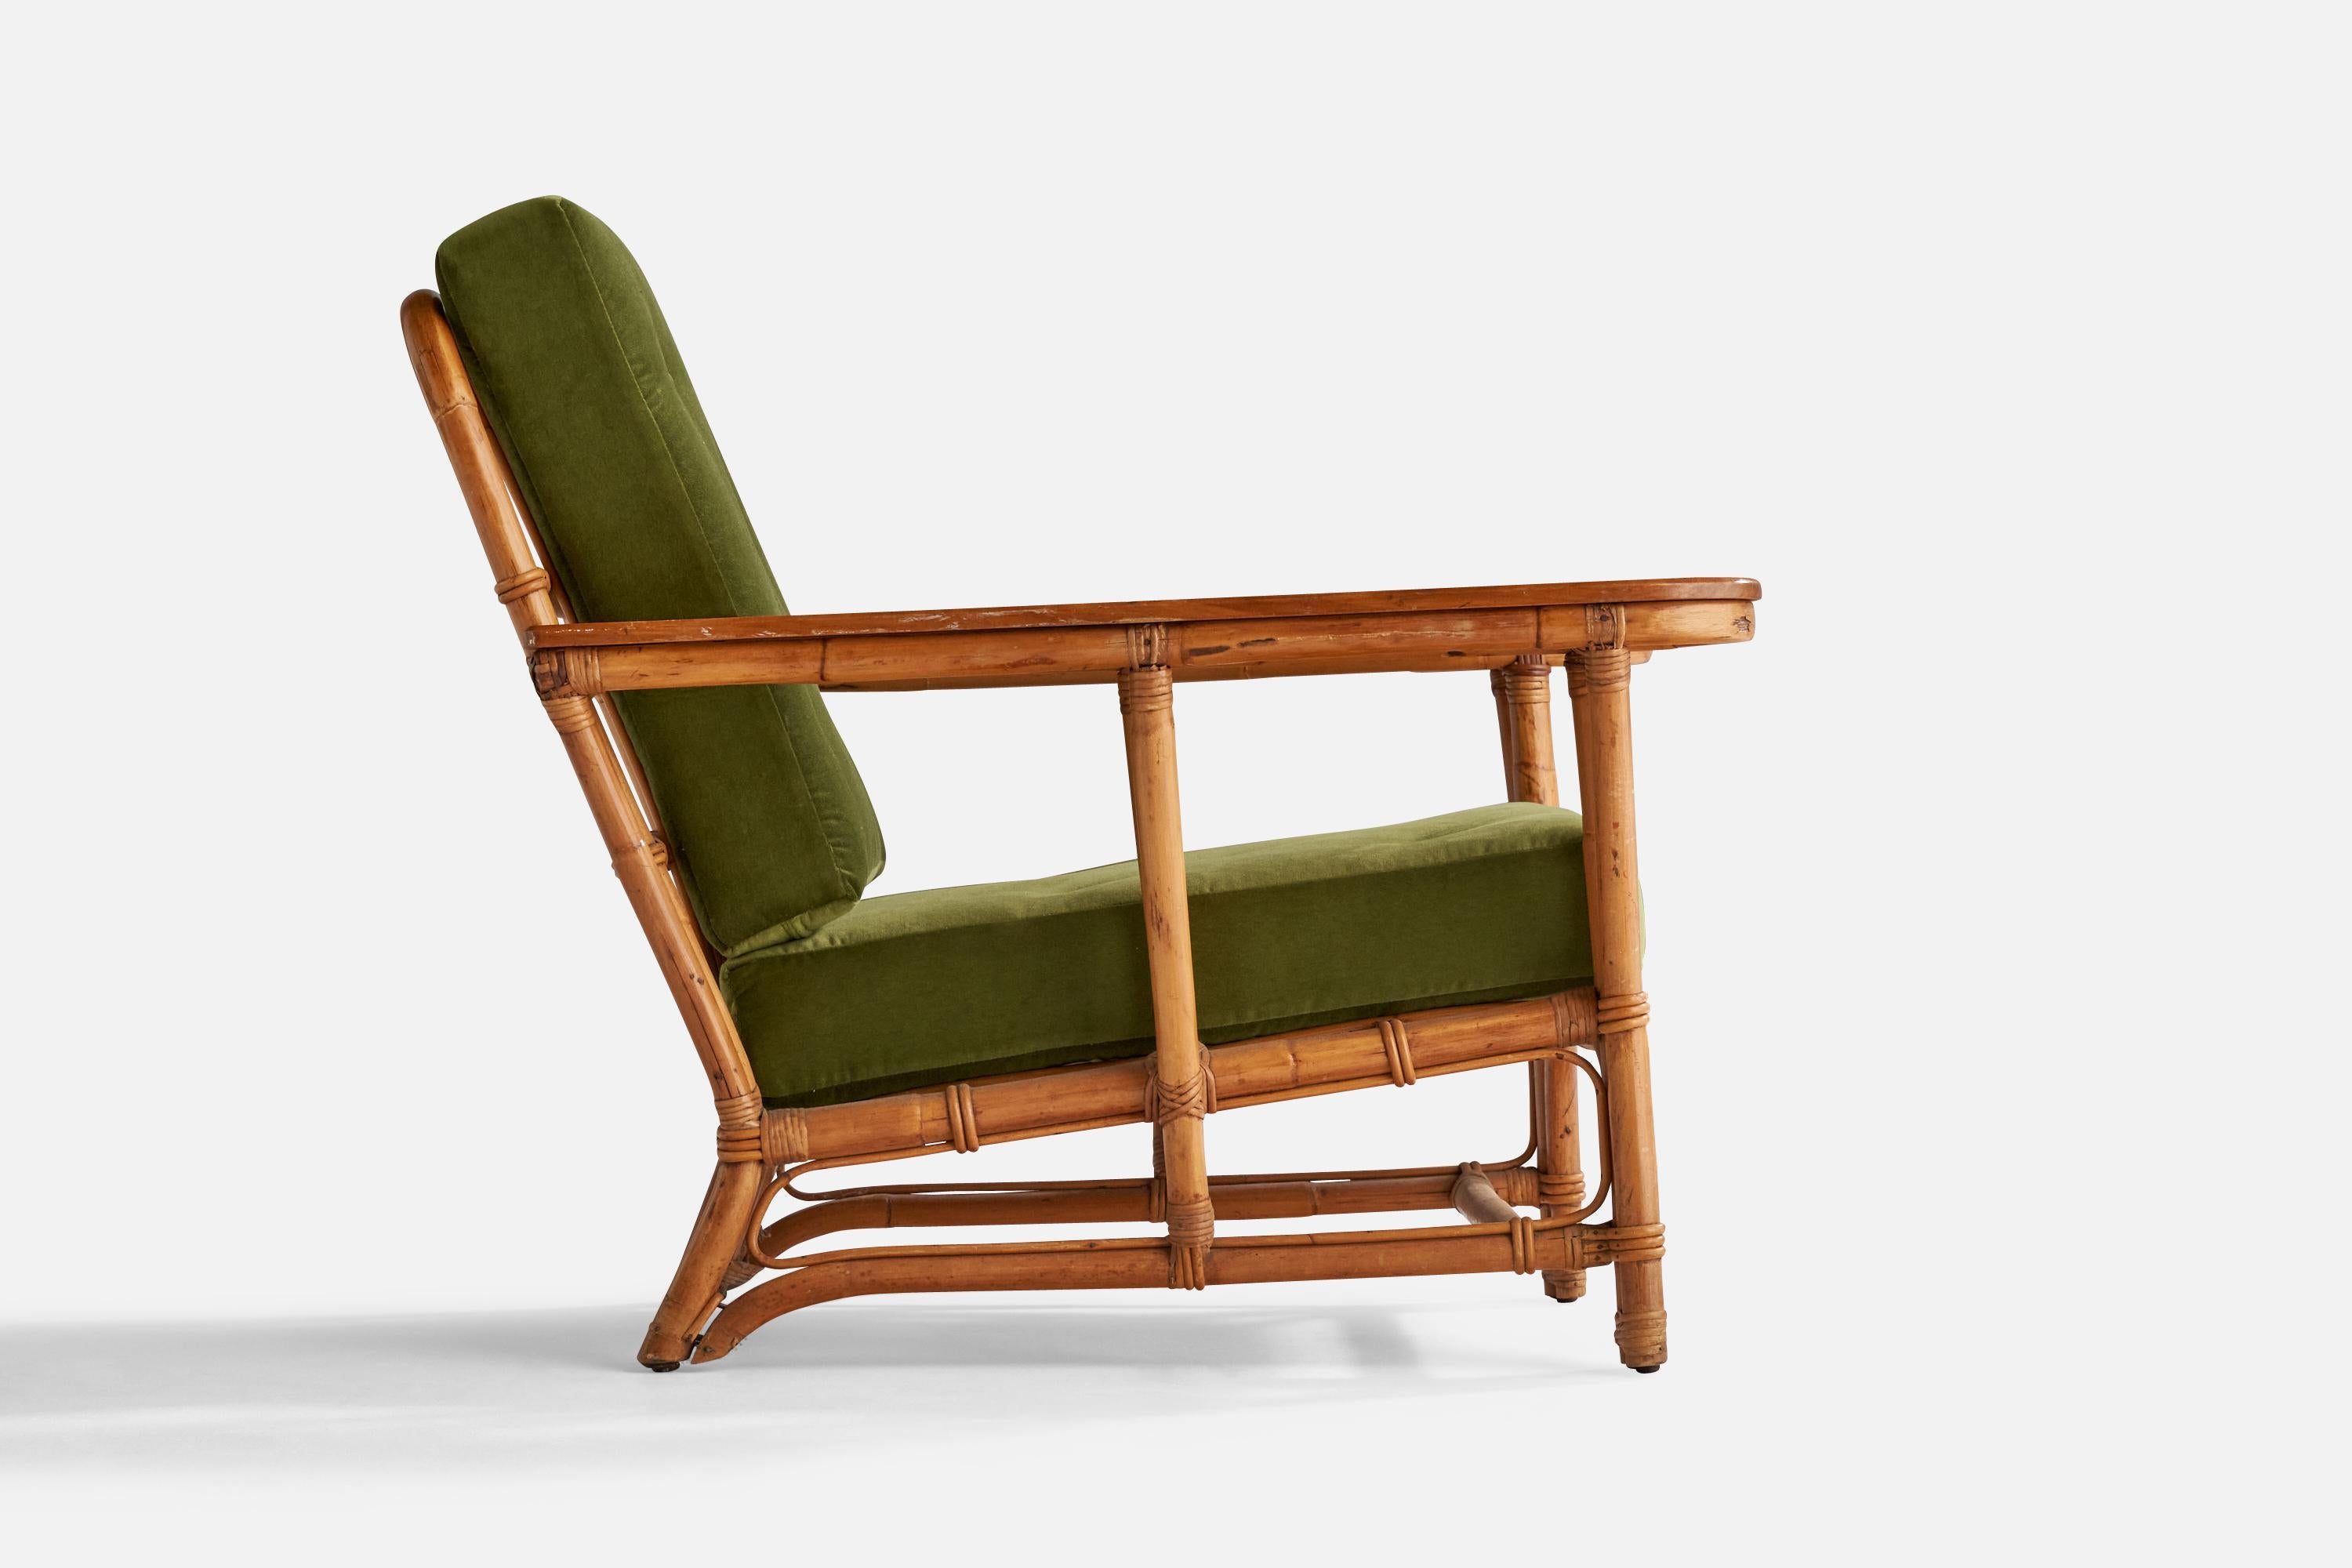 American Designer, Lounge Chair, Maple, Velvet, Bamboo, Rattan, USA, 1940s In Good Condition For Sale In High Point, NC